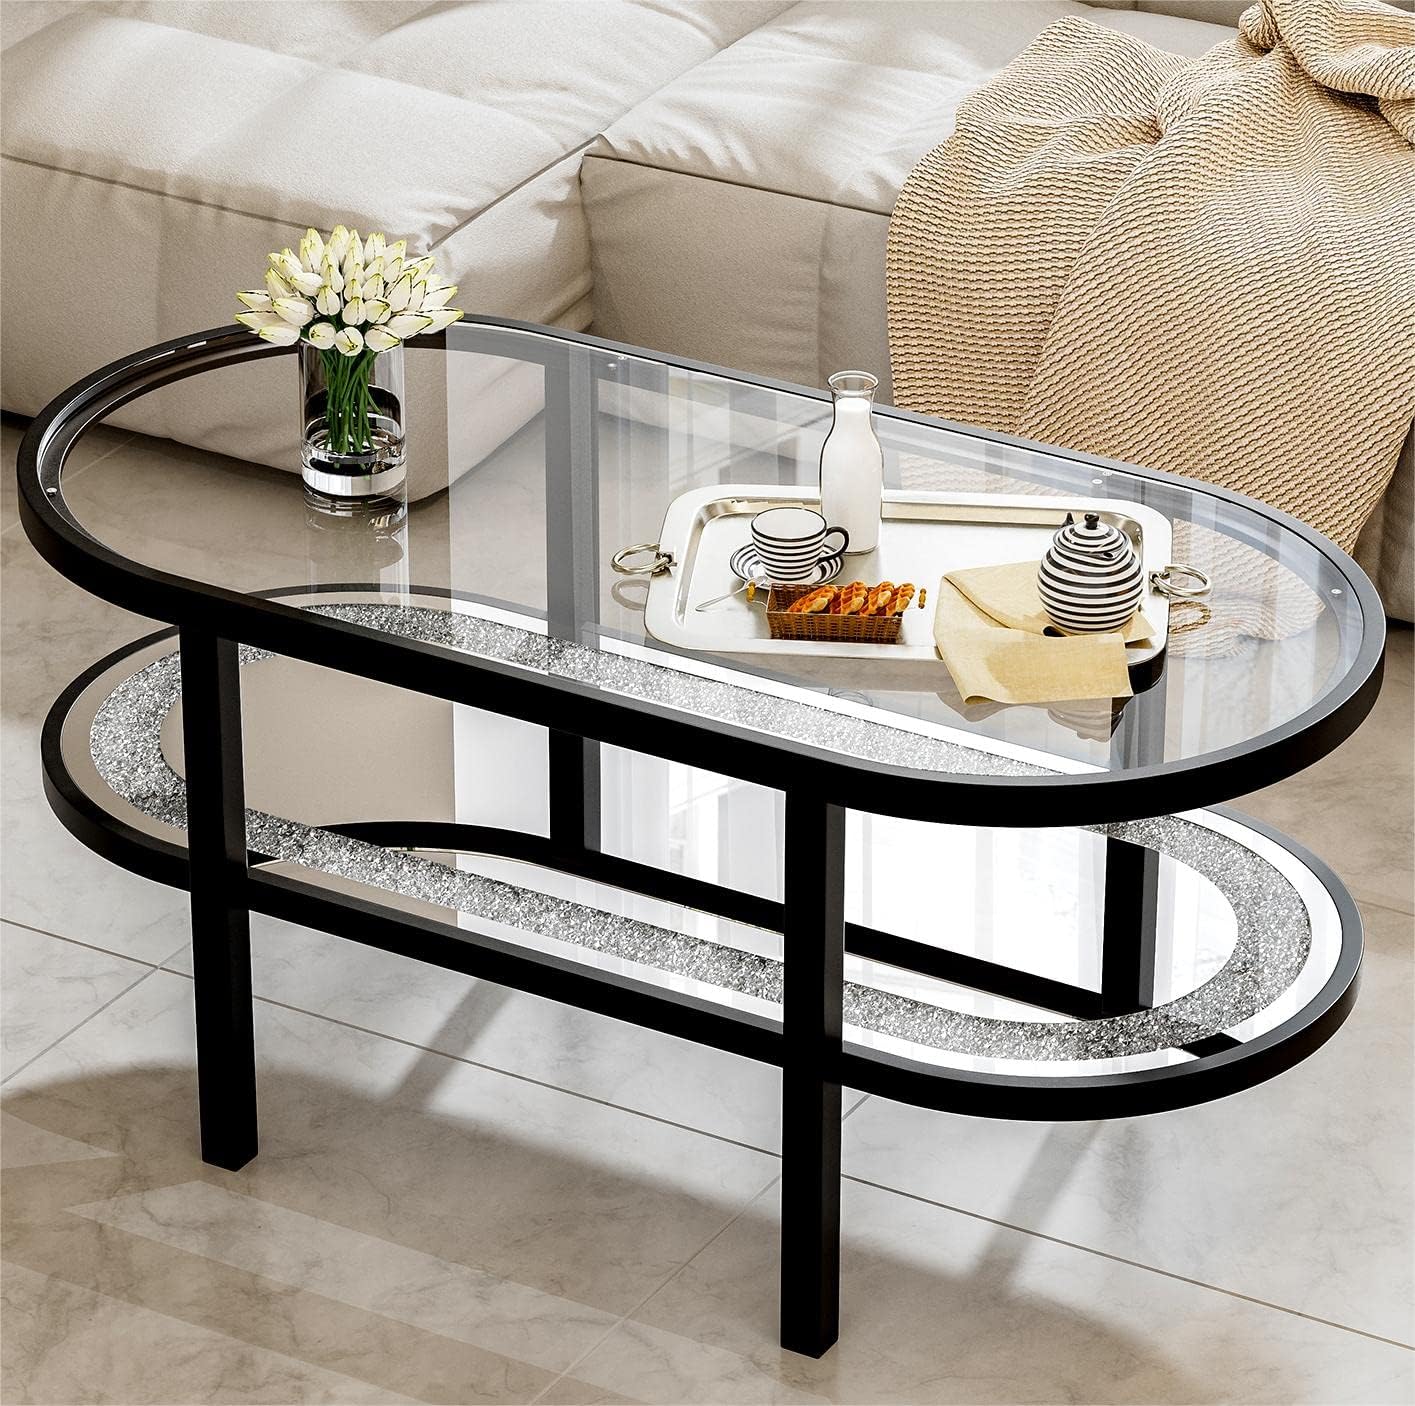 IKIFLY Glass Coffee Table with 2 Tier Glass & Mirror Crystal Boards, Mirrored Rectangle End Table Coffee Tea Table with Black Sturdy Metal Legs for Living Room Bedroom